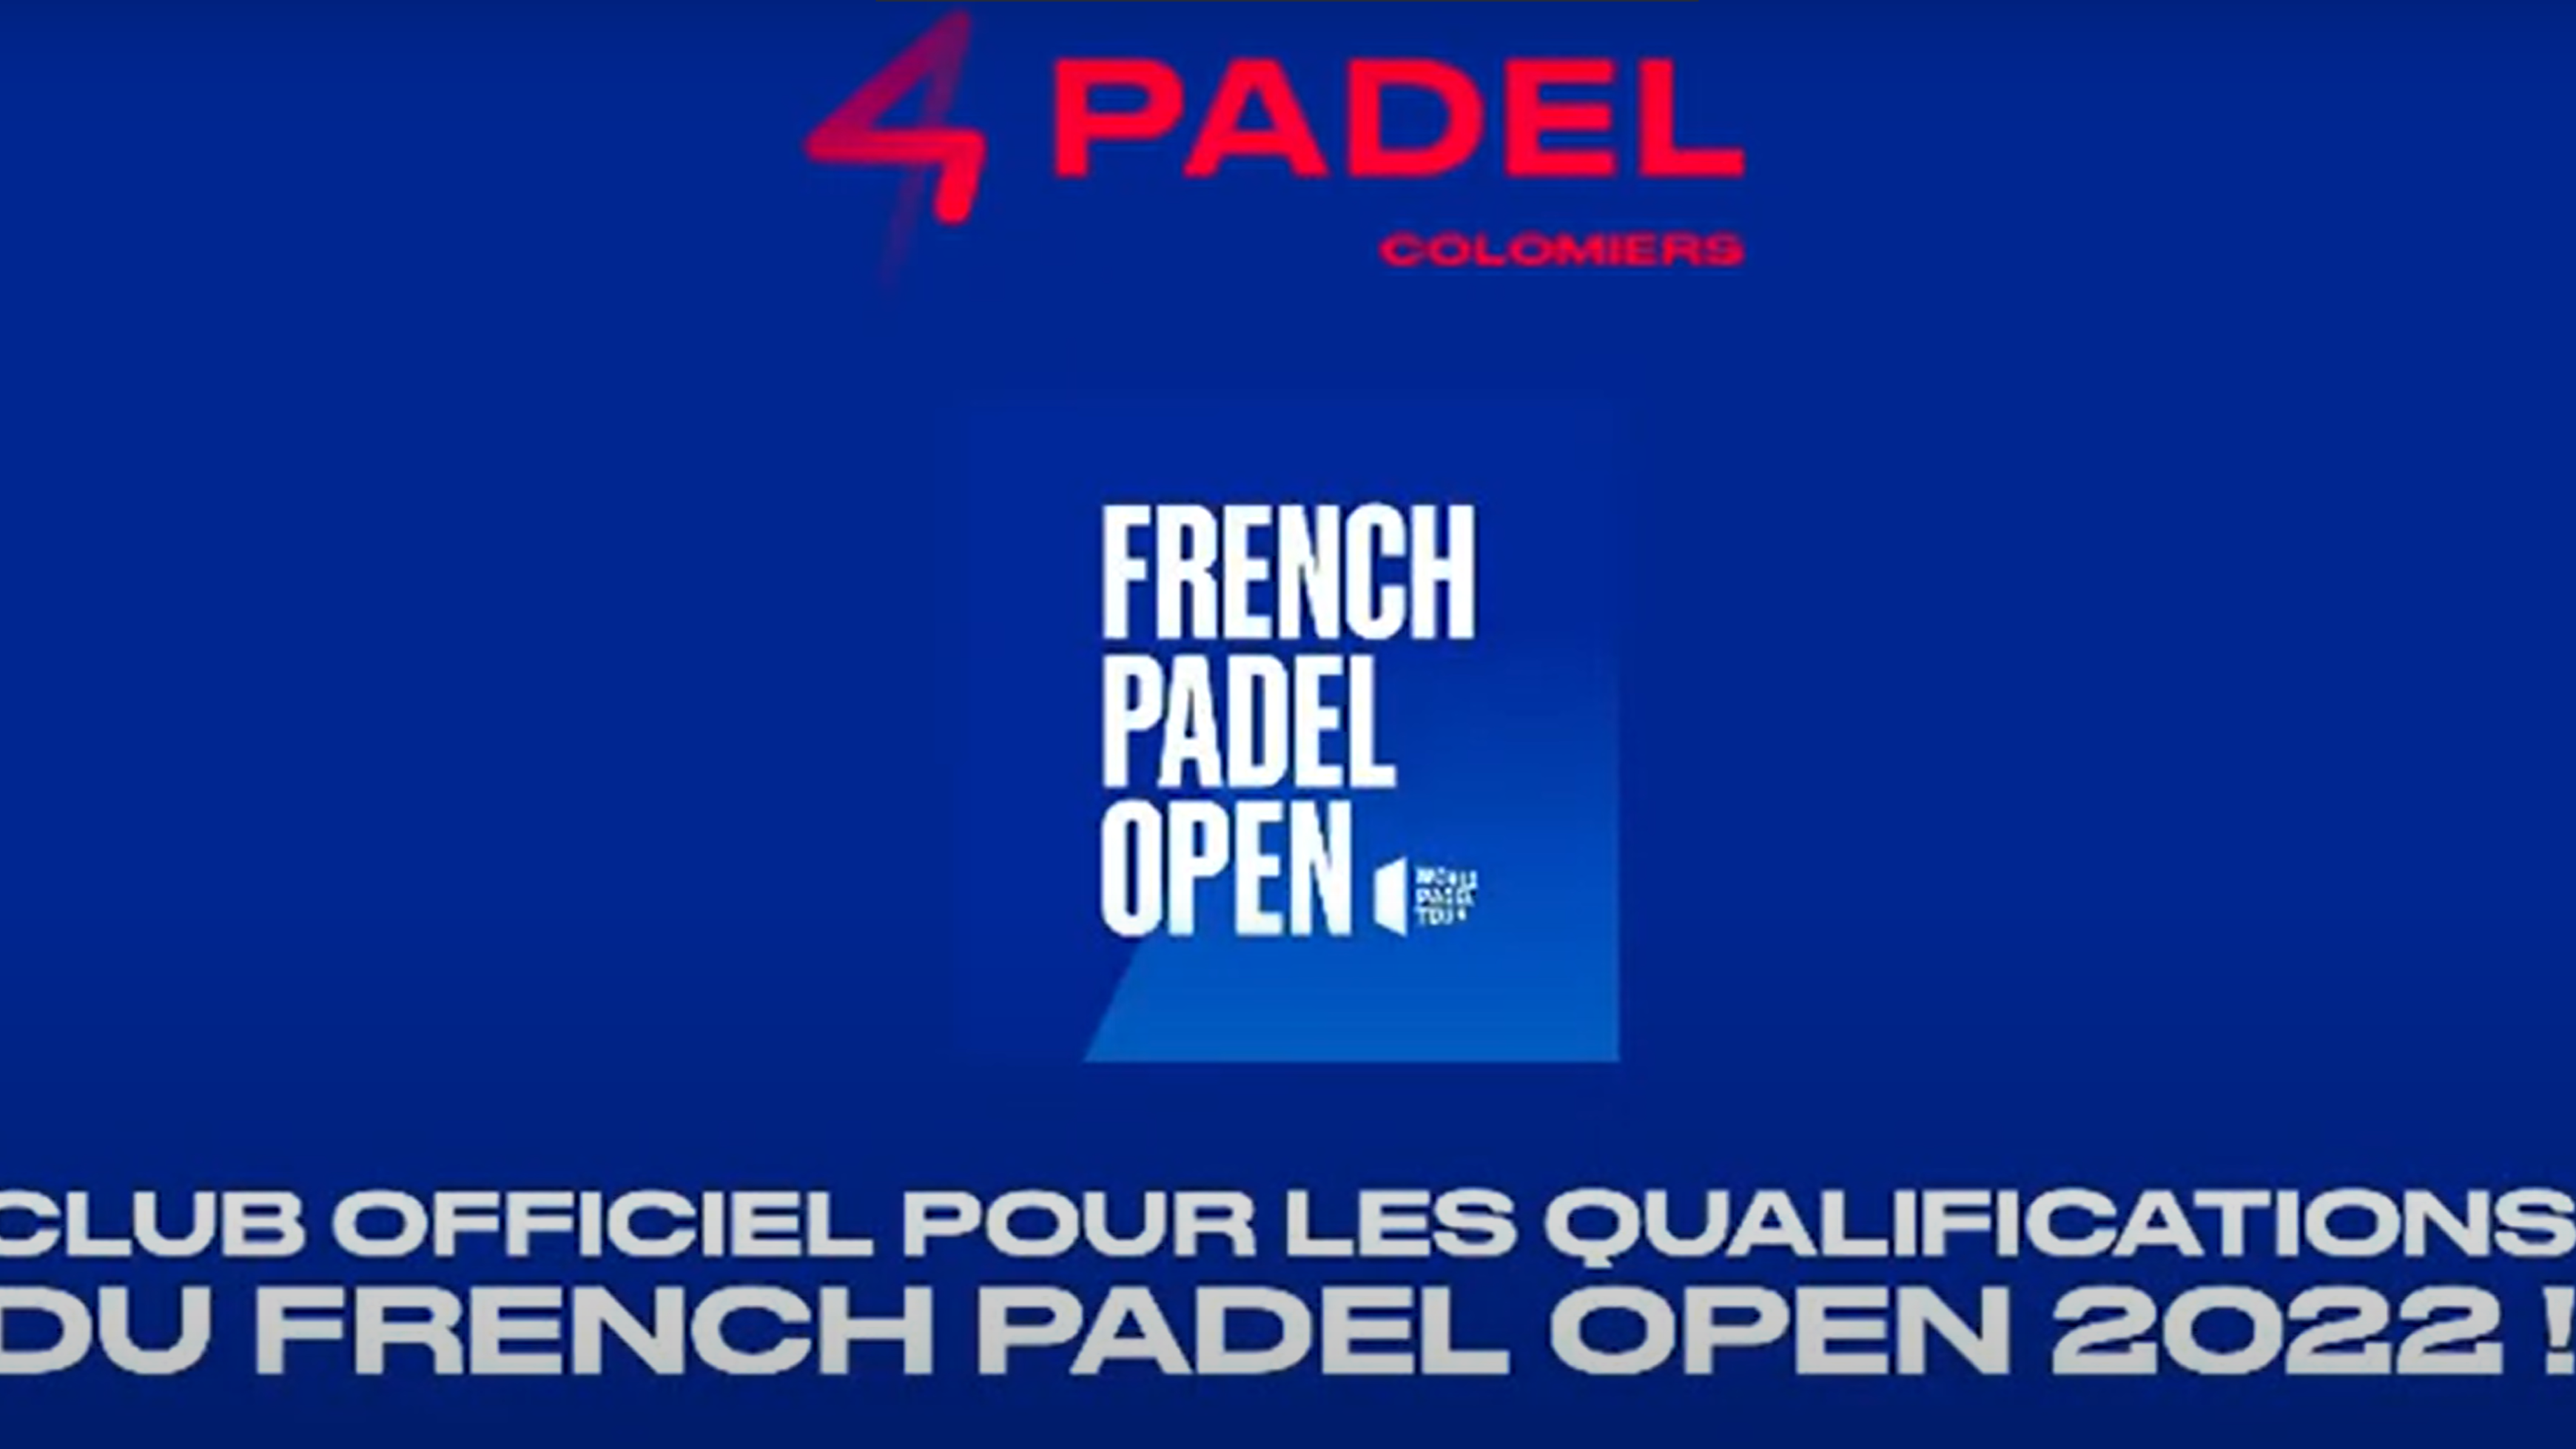 French Padel Open: 4Padel Toulouse, the host club